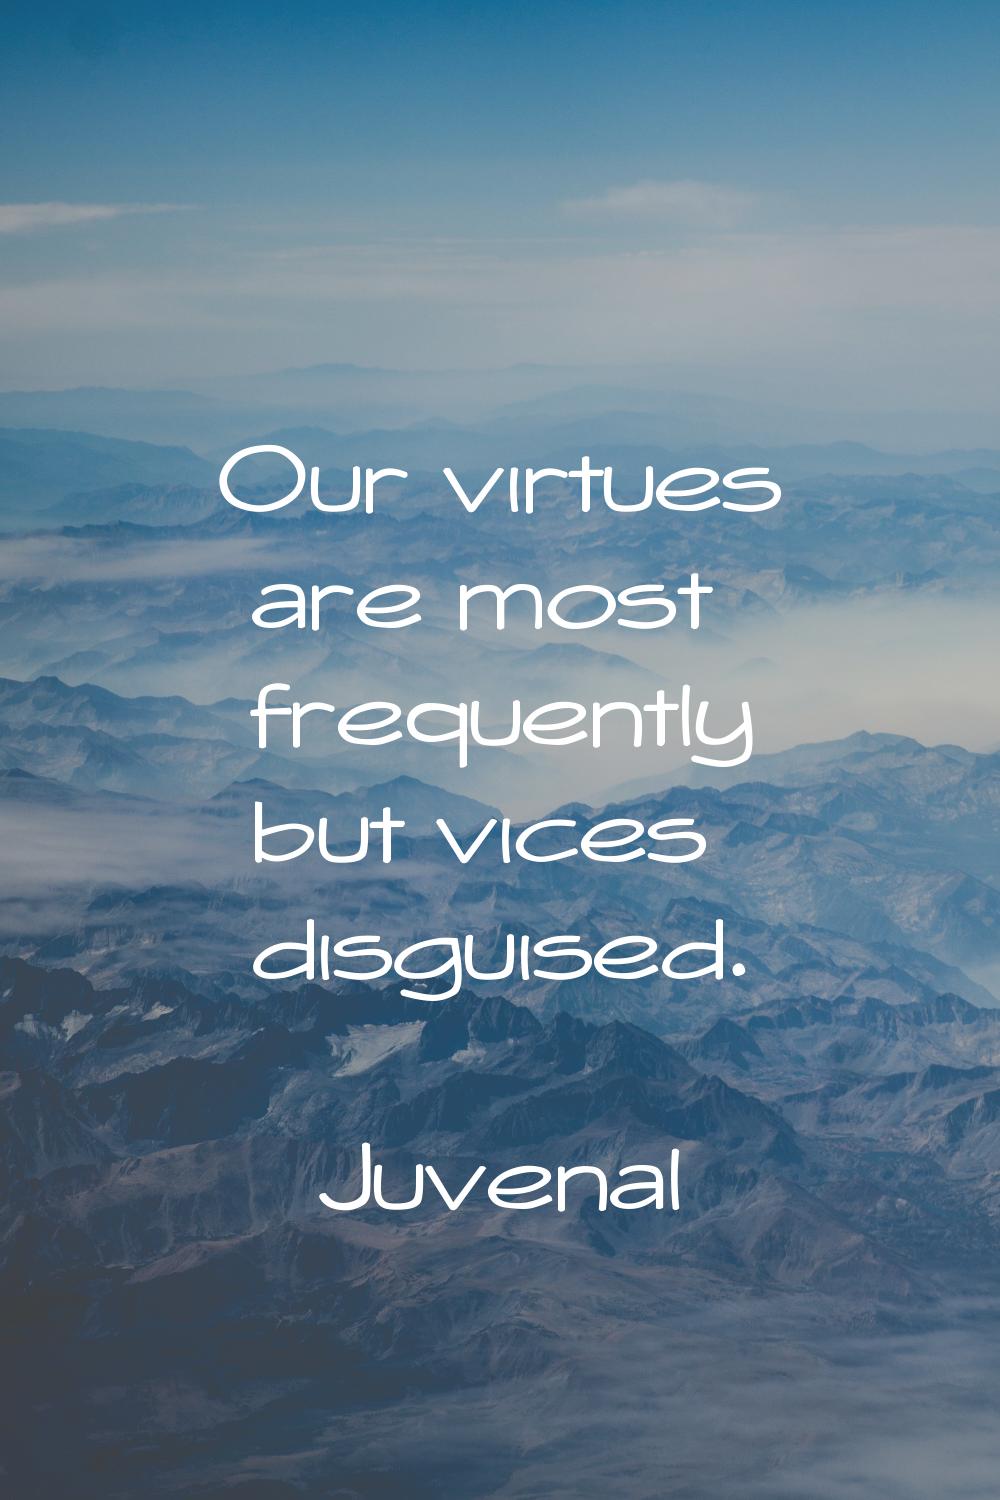 Our virtues are most frequently but vices disguised.